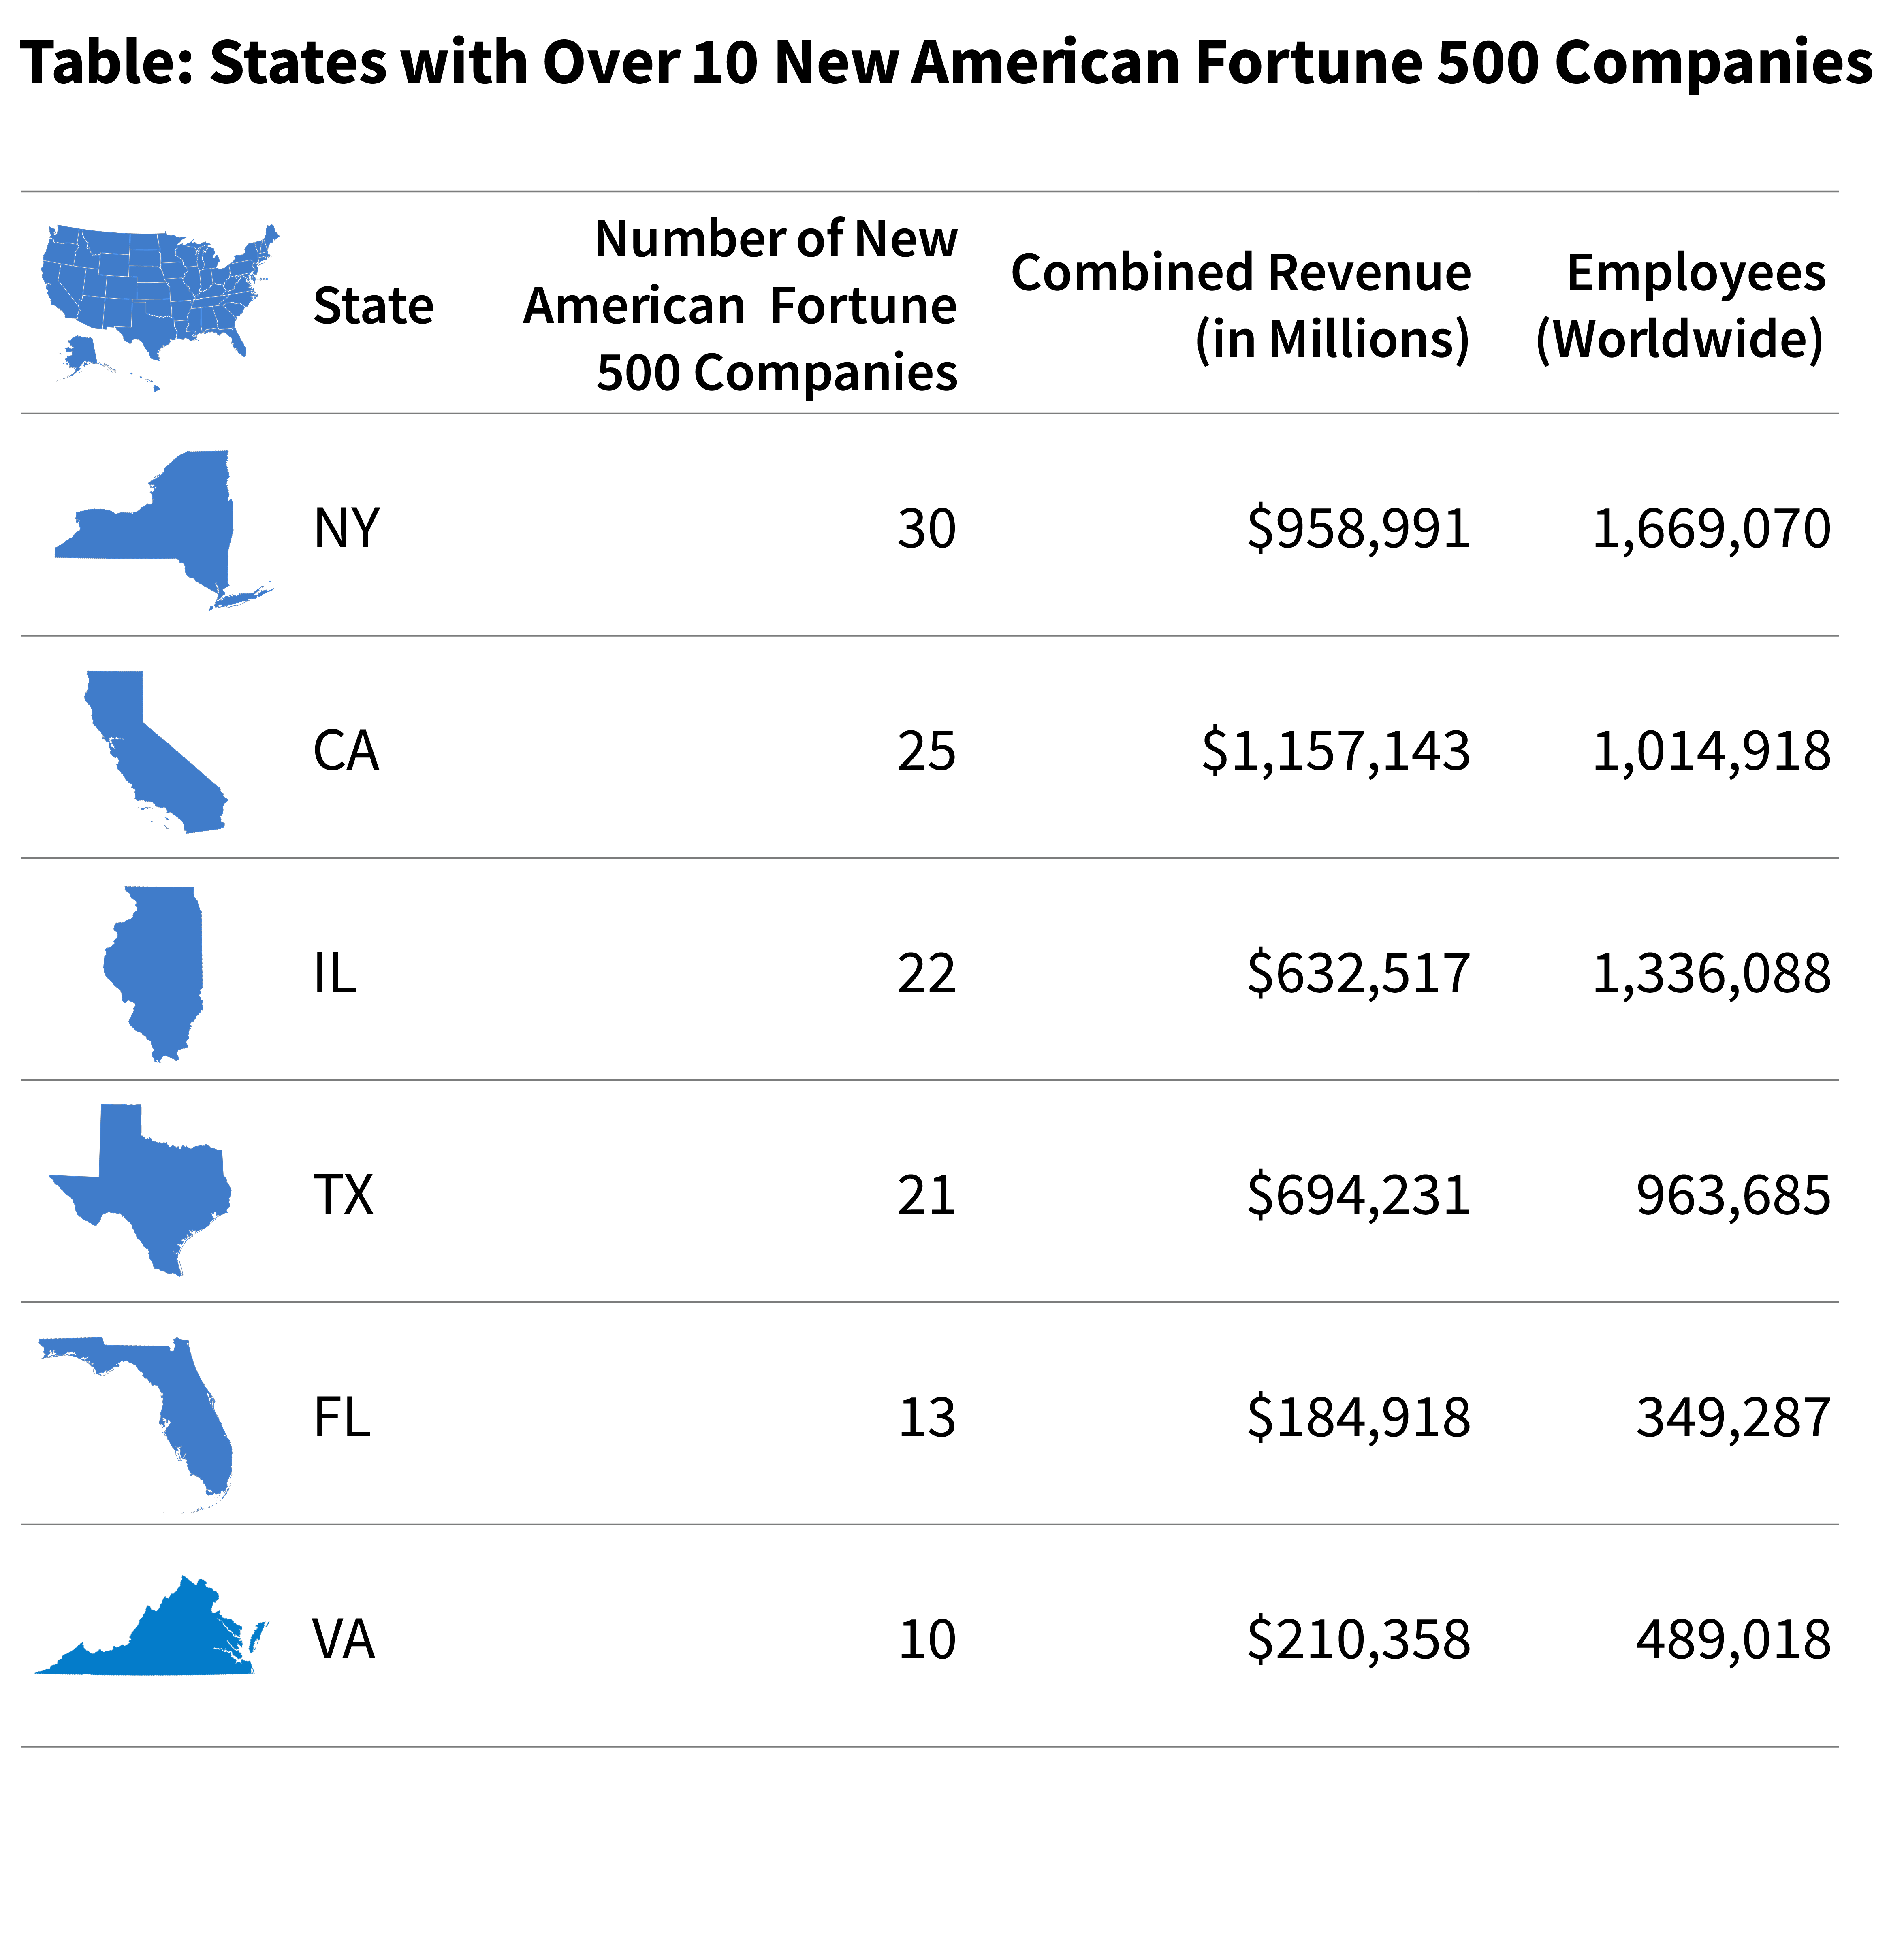 Table of States with 10 or more New American Fortune companies